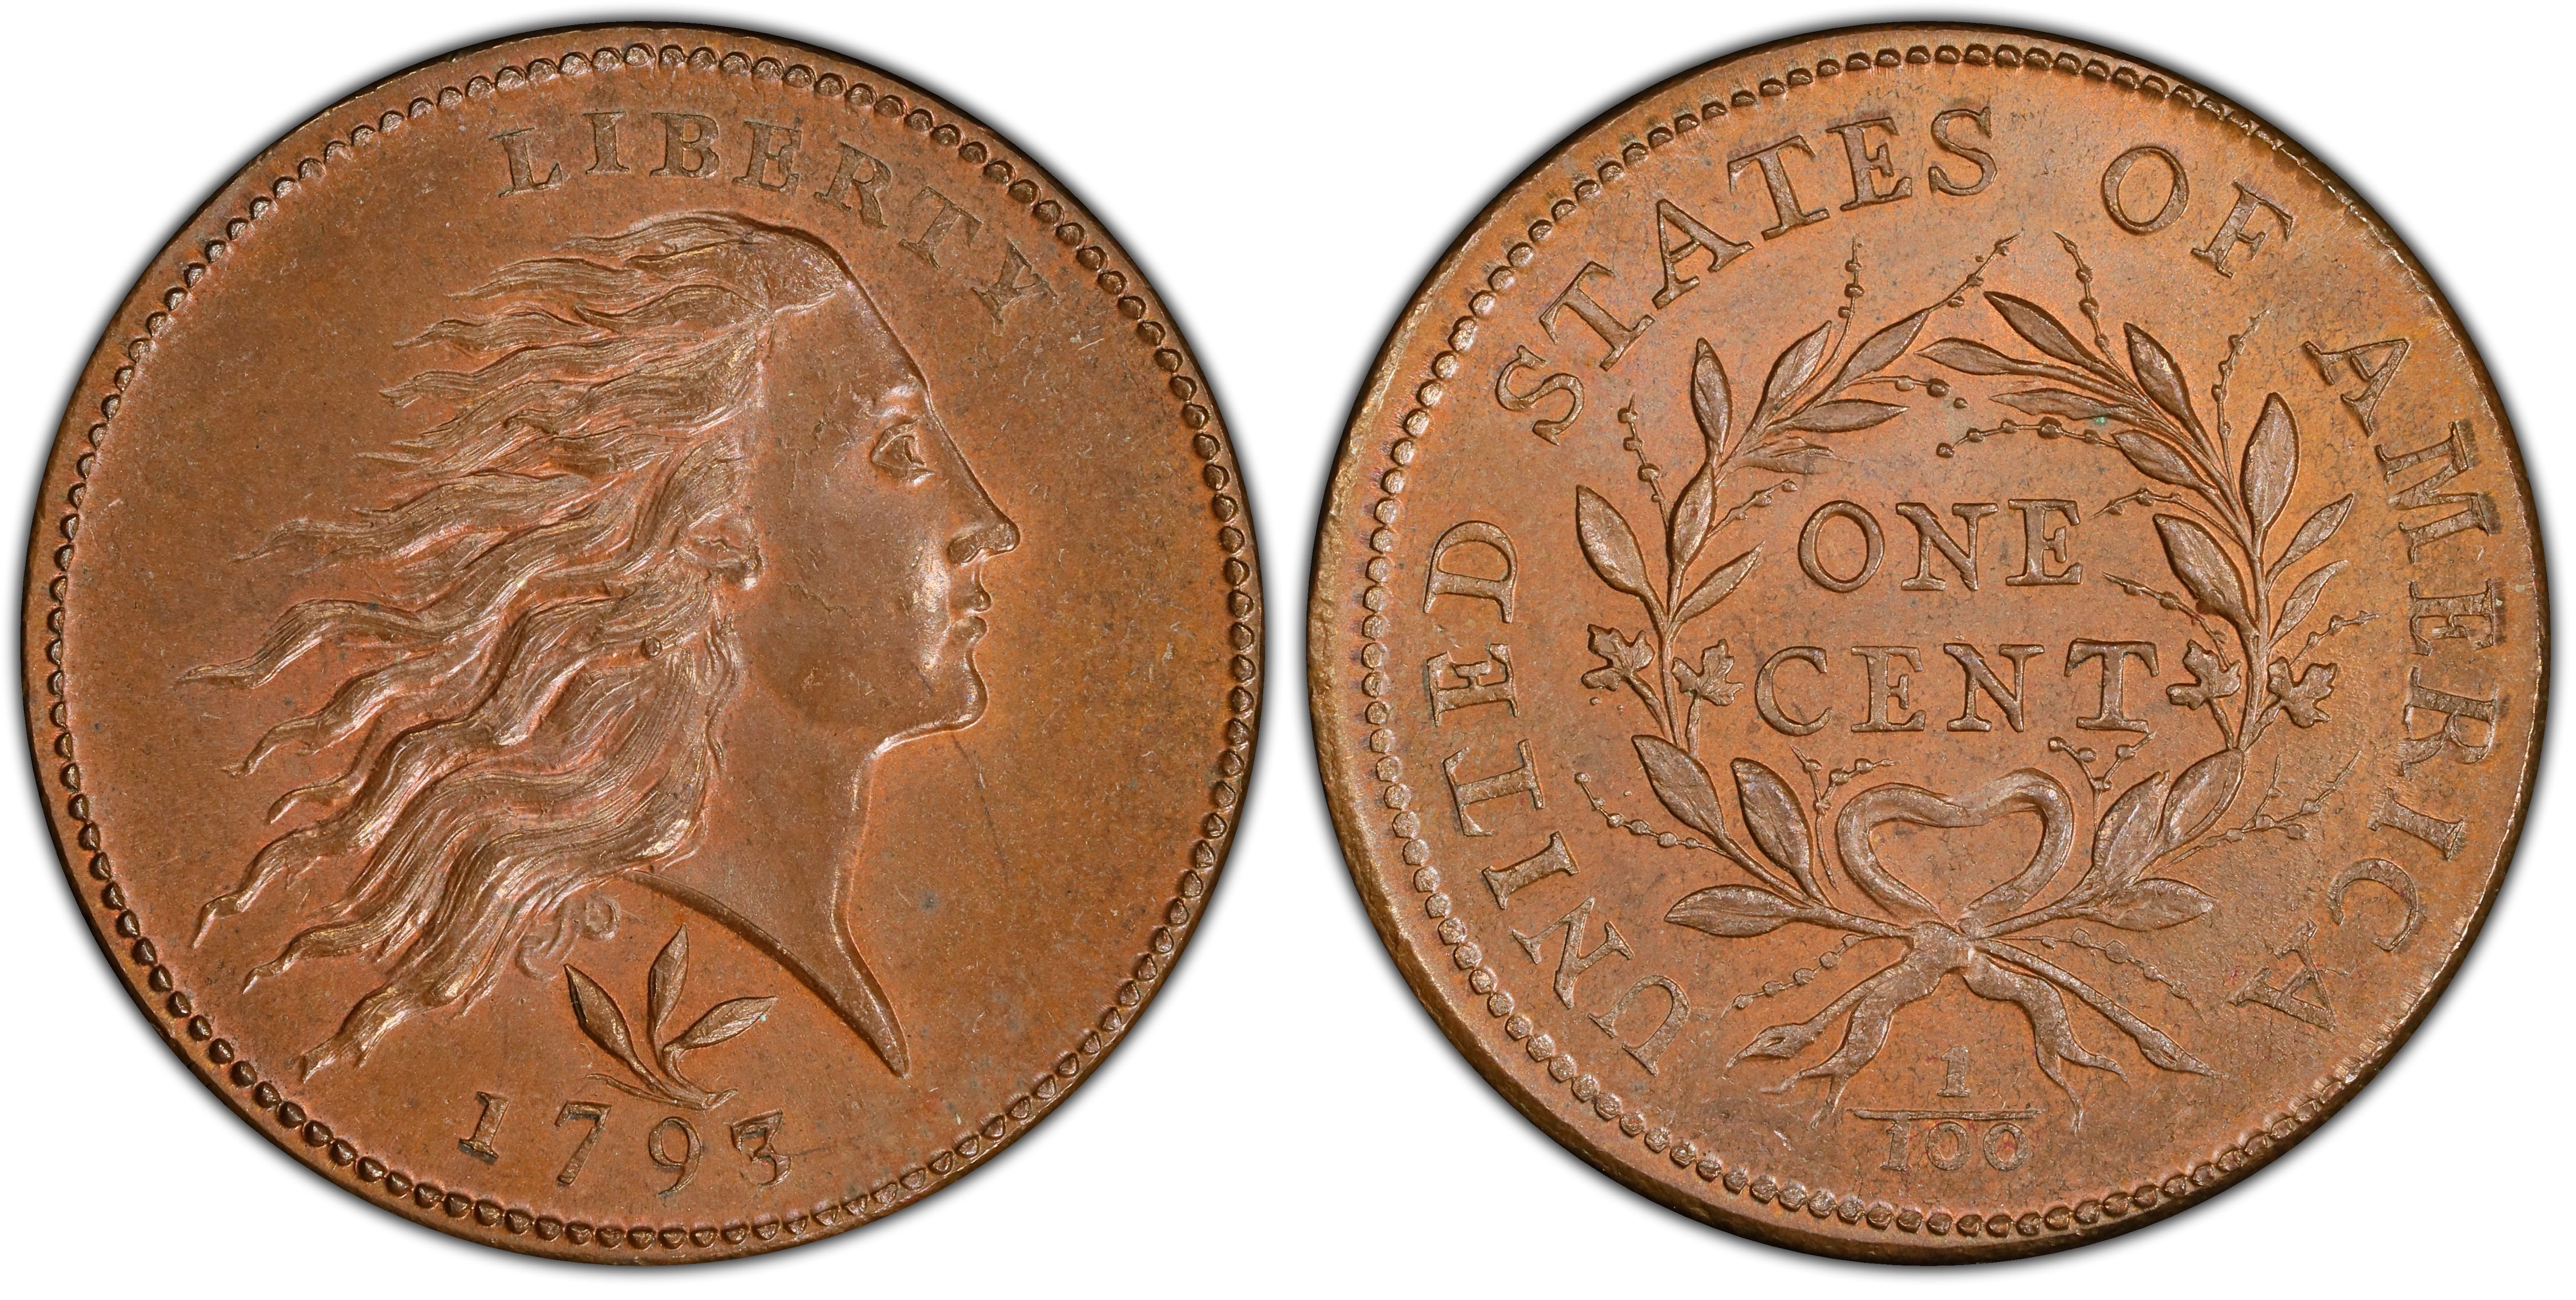 1793 1C Wreath, Vine and Bars, BN (Regular Strike) Flowing Hair Large Cent  - PCGS CoinFacts